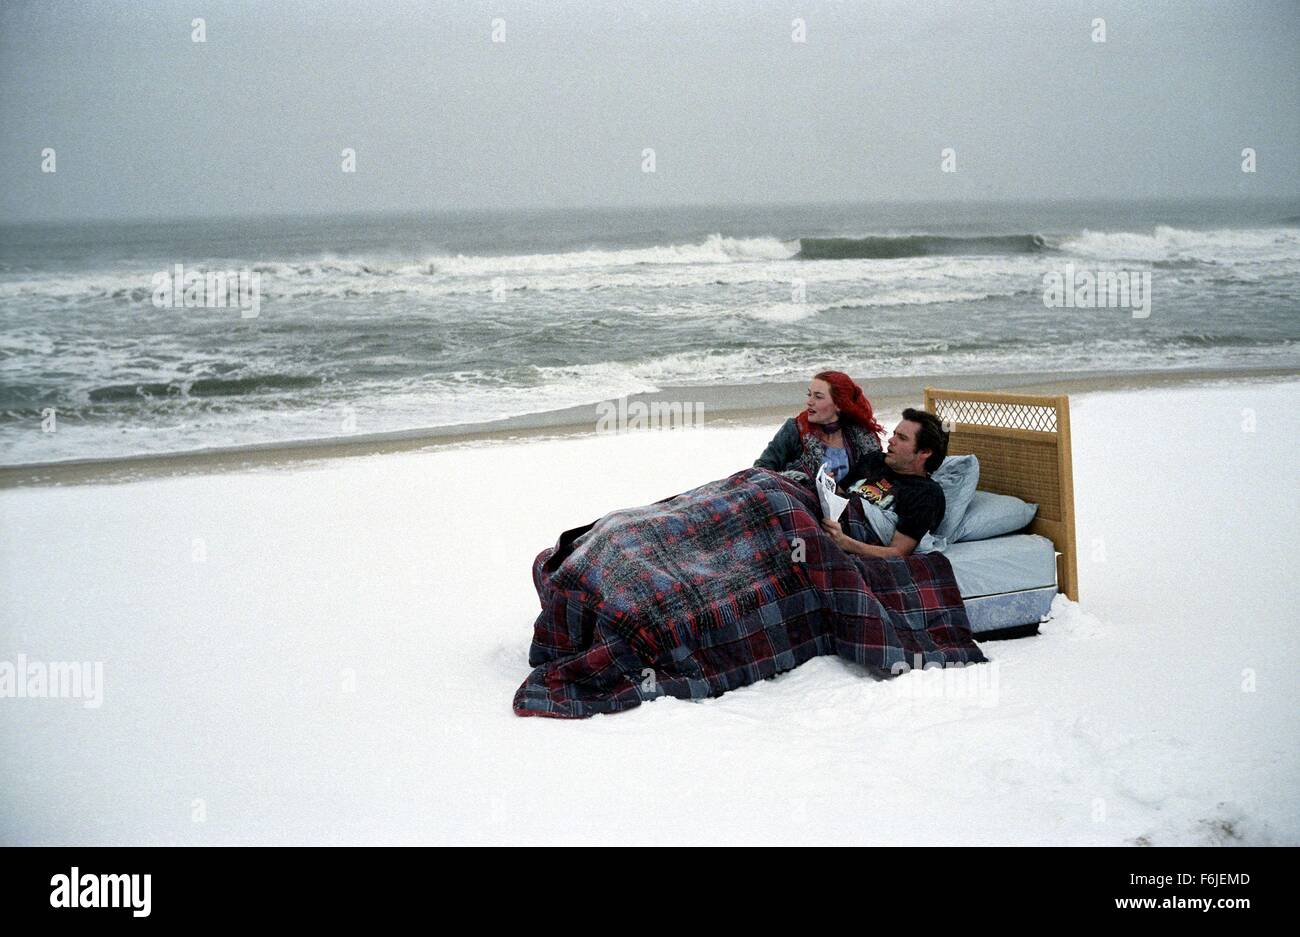 RELEASE DATE: March 19, 2004. MOVIE TITLE: Eternal Sunshine of the Spotless Mind. STUDIO: Focus Features. PLOT: A man, Joel Barish, heartbroken that his girlfriend Clementine underwent a procedure to erase him from her memory, decides to do the same. However, as he watches his memories of her fade away, he realizes that he still loves her, and may be too late to correct his mistake. PICTURED: KATE WINSLET as Clementine Kruczynski and JIM CARREY as Joel Barish. Stock Photo